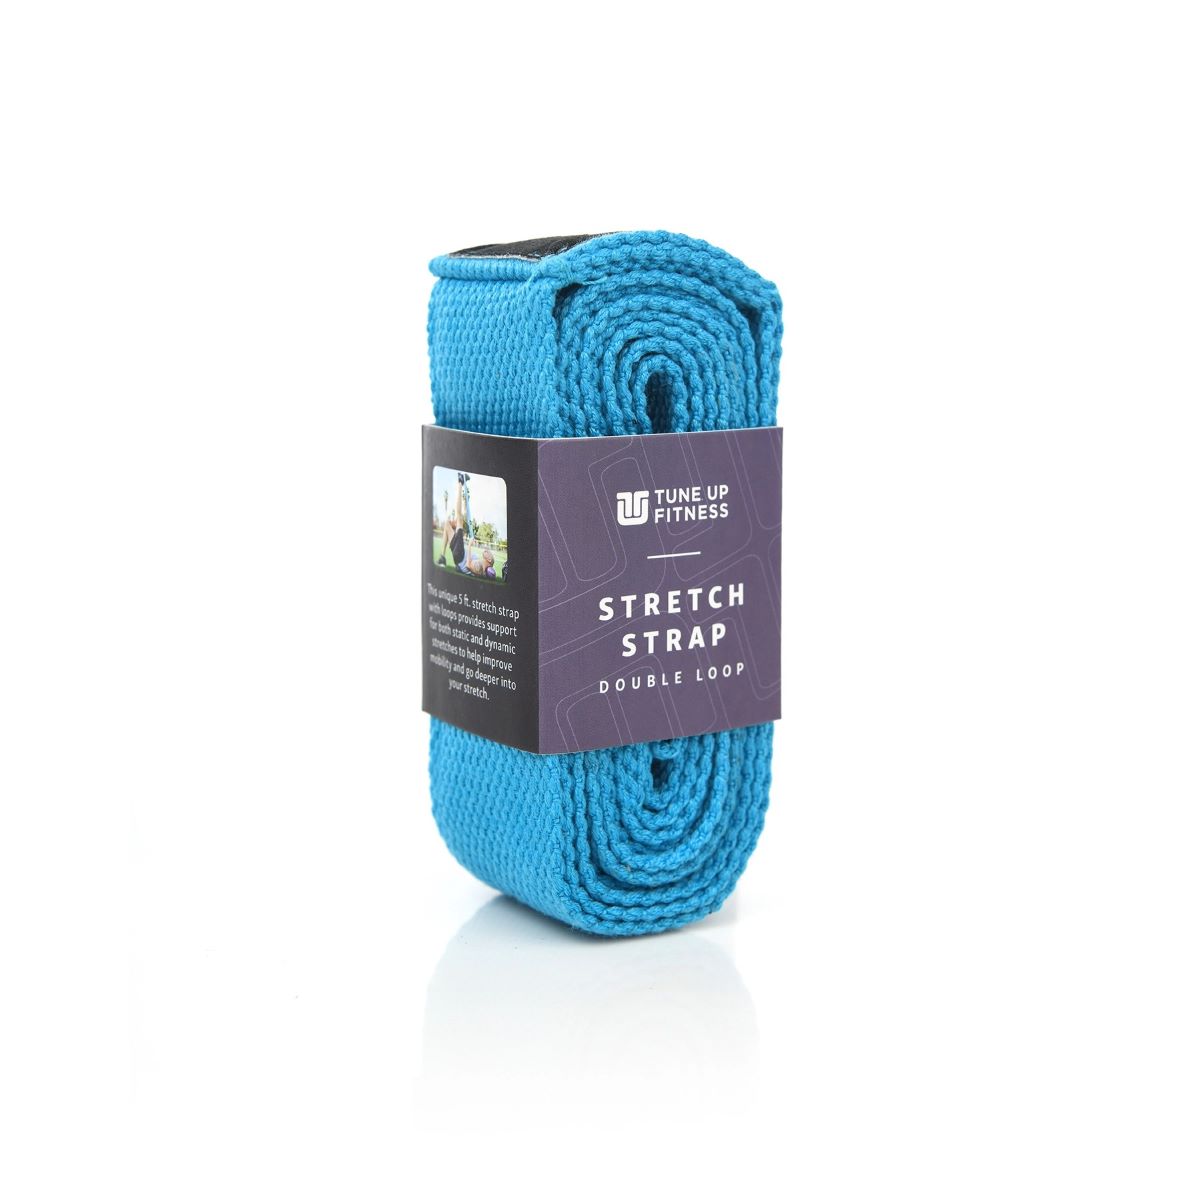 Tune Up Fitness Stretch Strap Double Loop